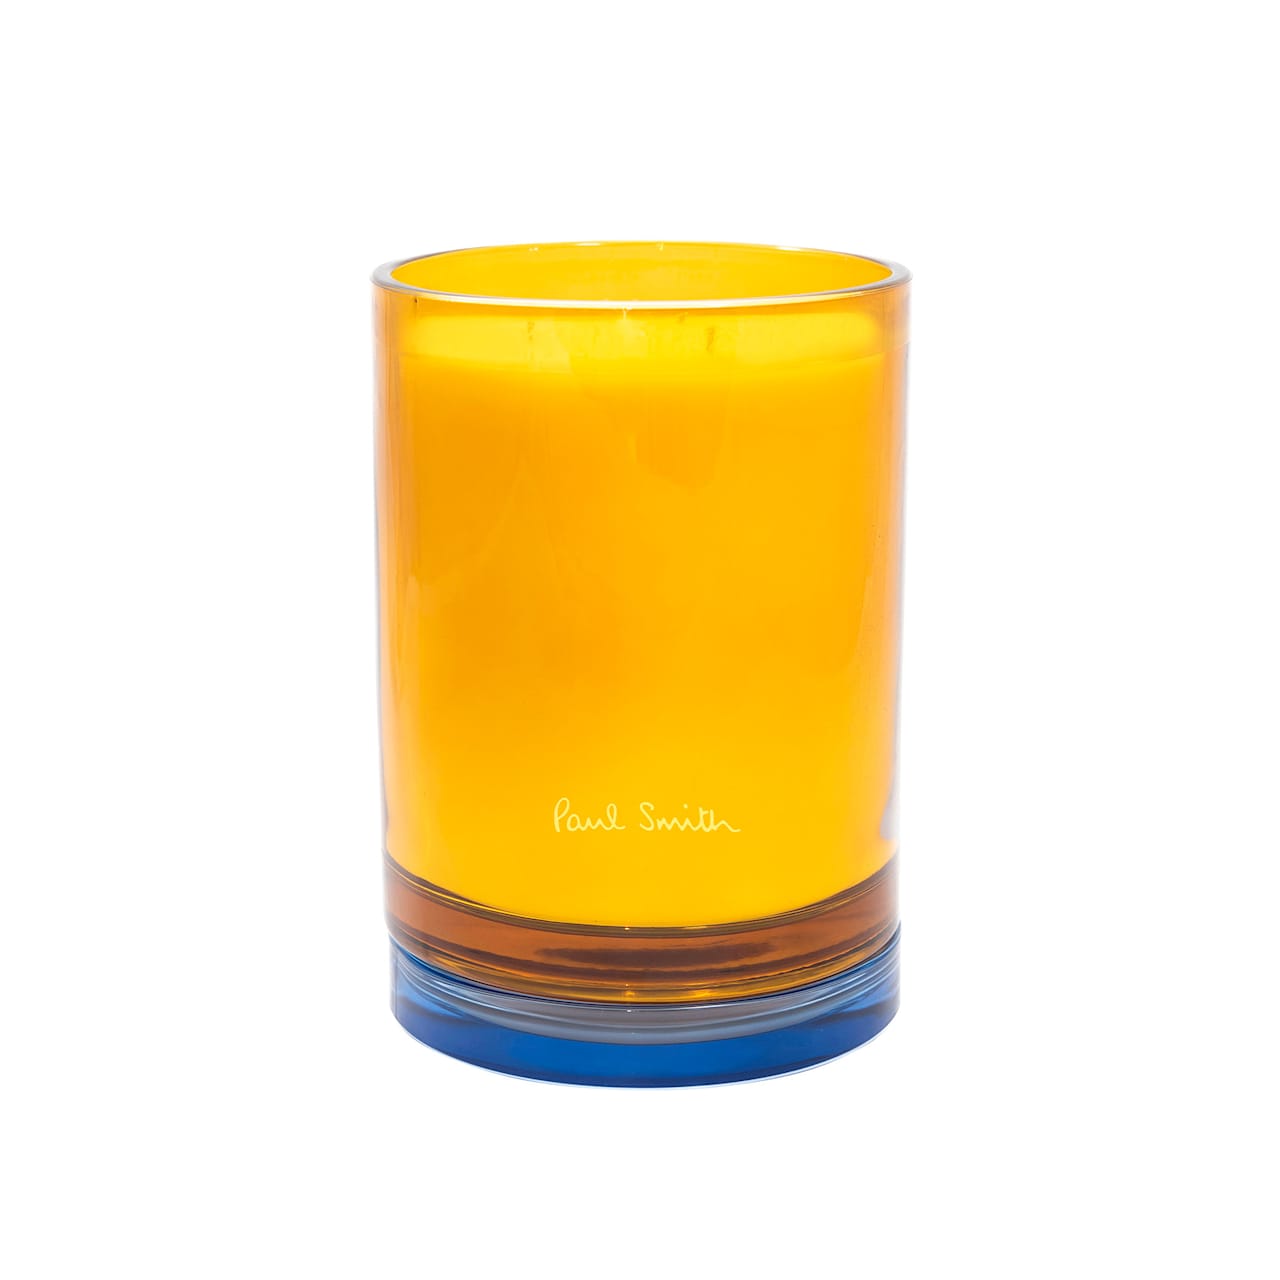 Paul Smith Daydreamer Candle